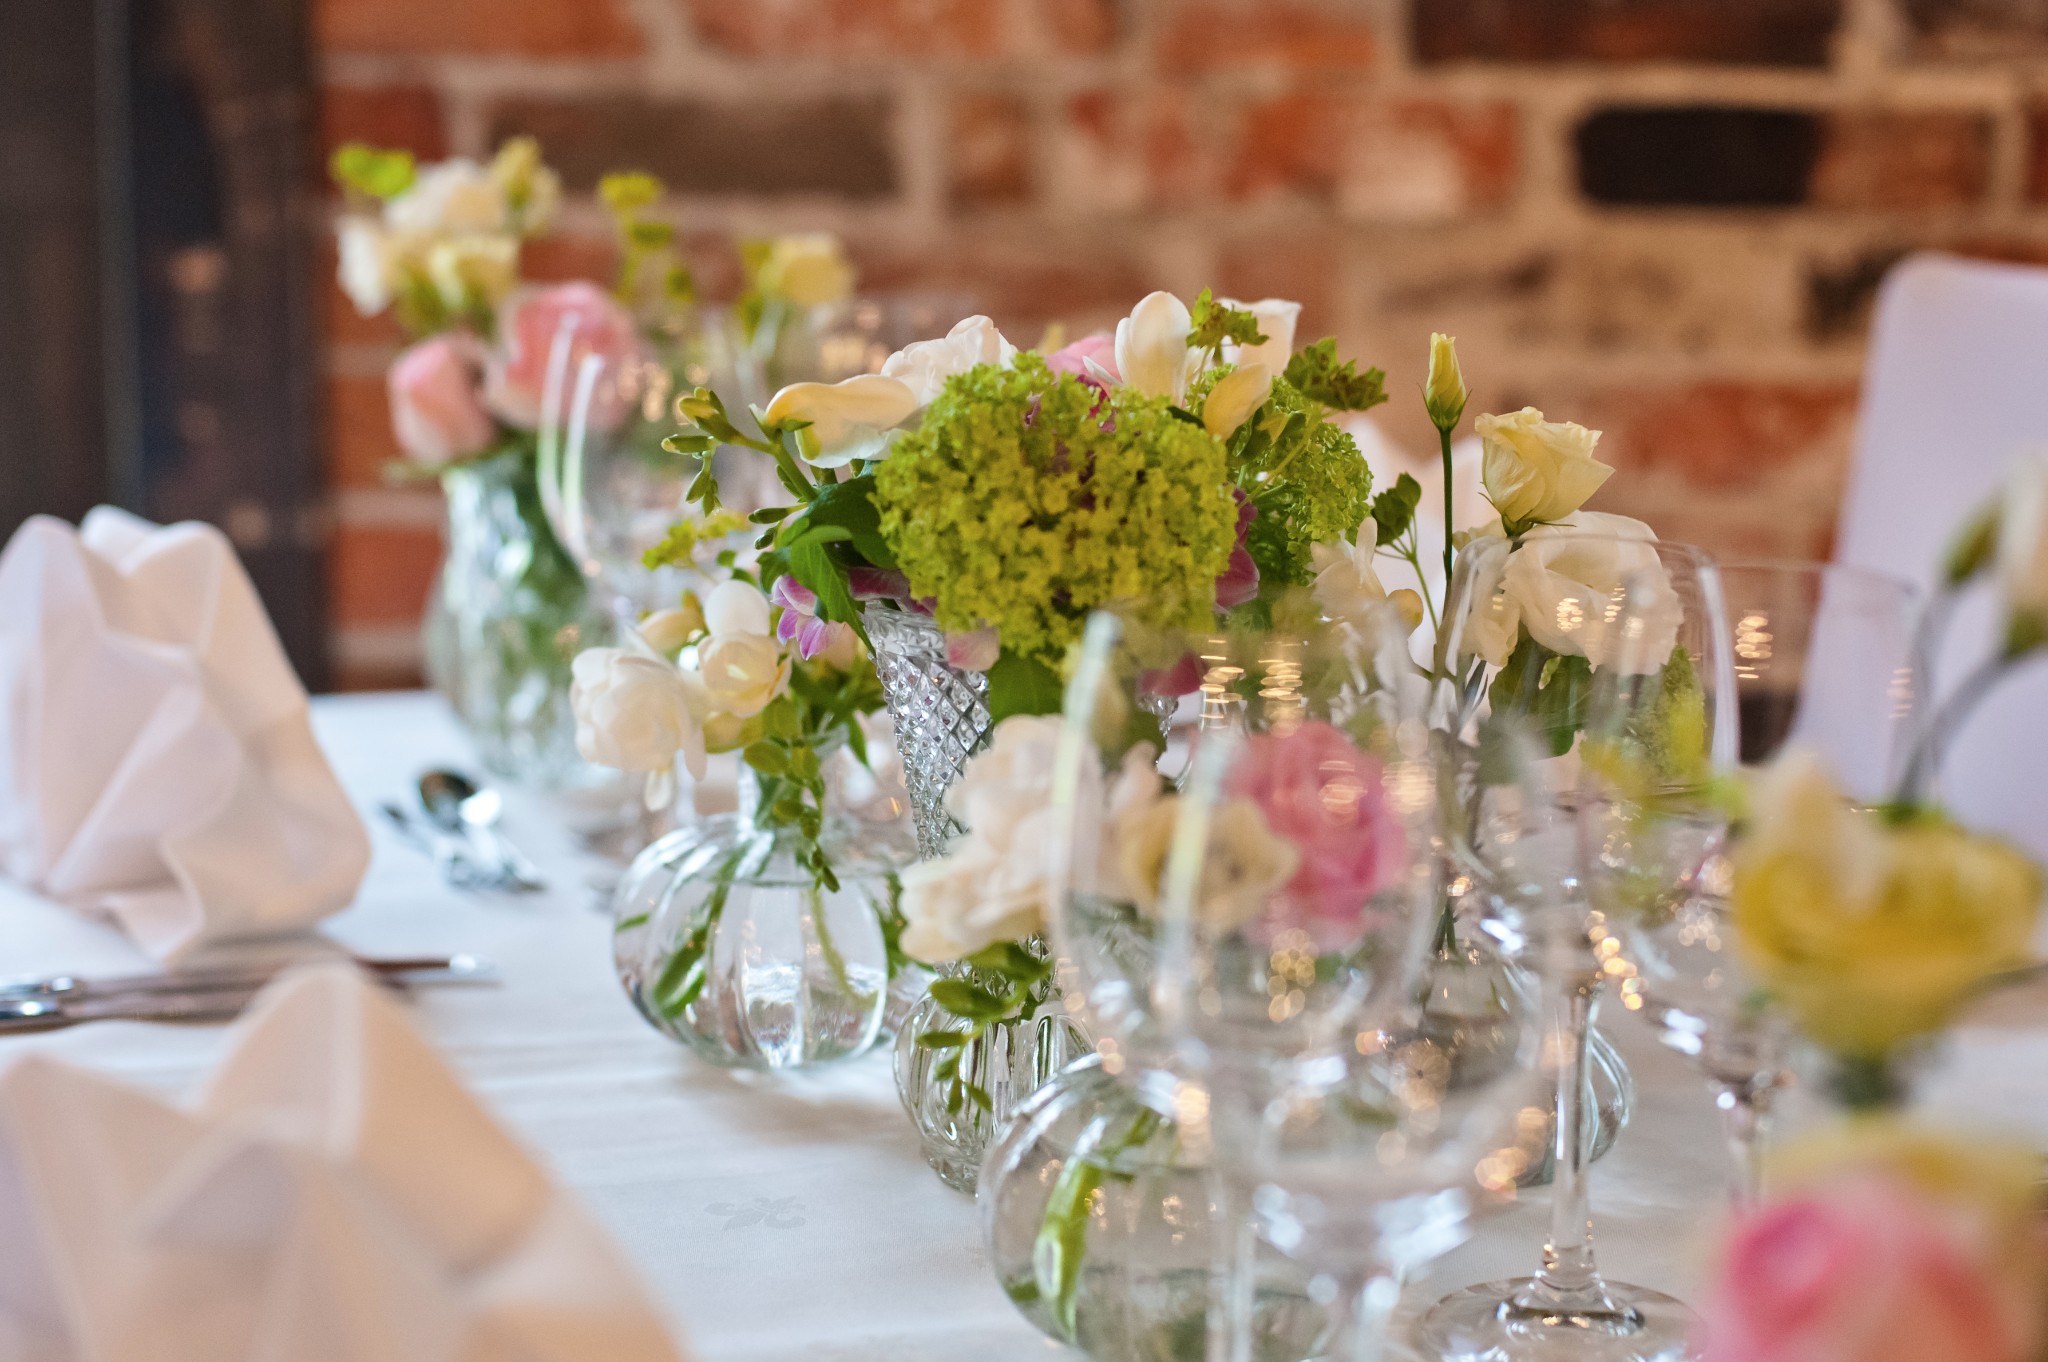 Choose from a selection of beautiful and historic event spaces, each with their own style and character to create an occasion that’s as special as your love.